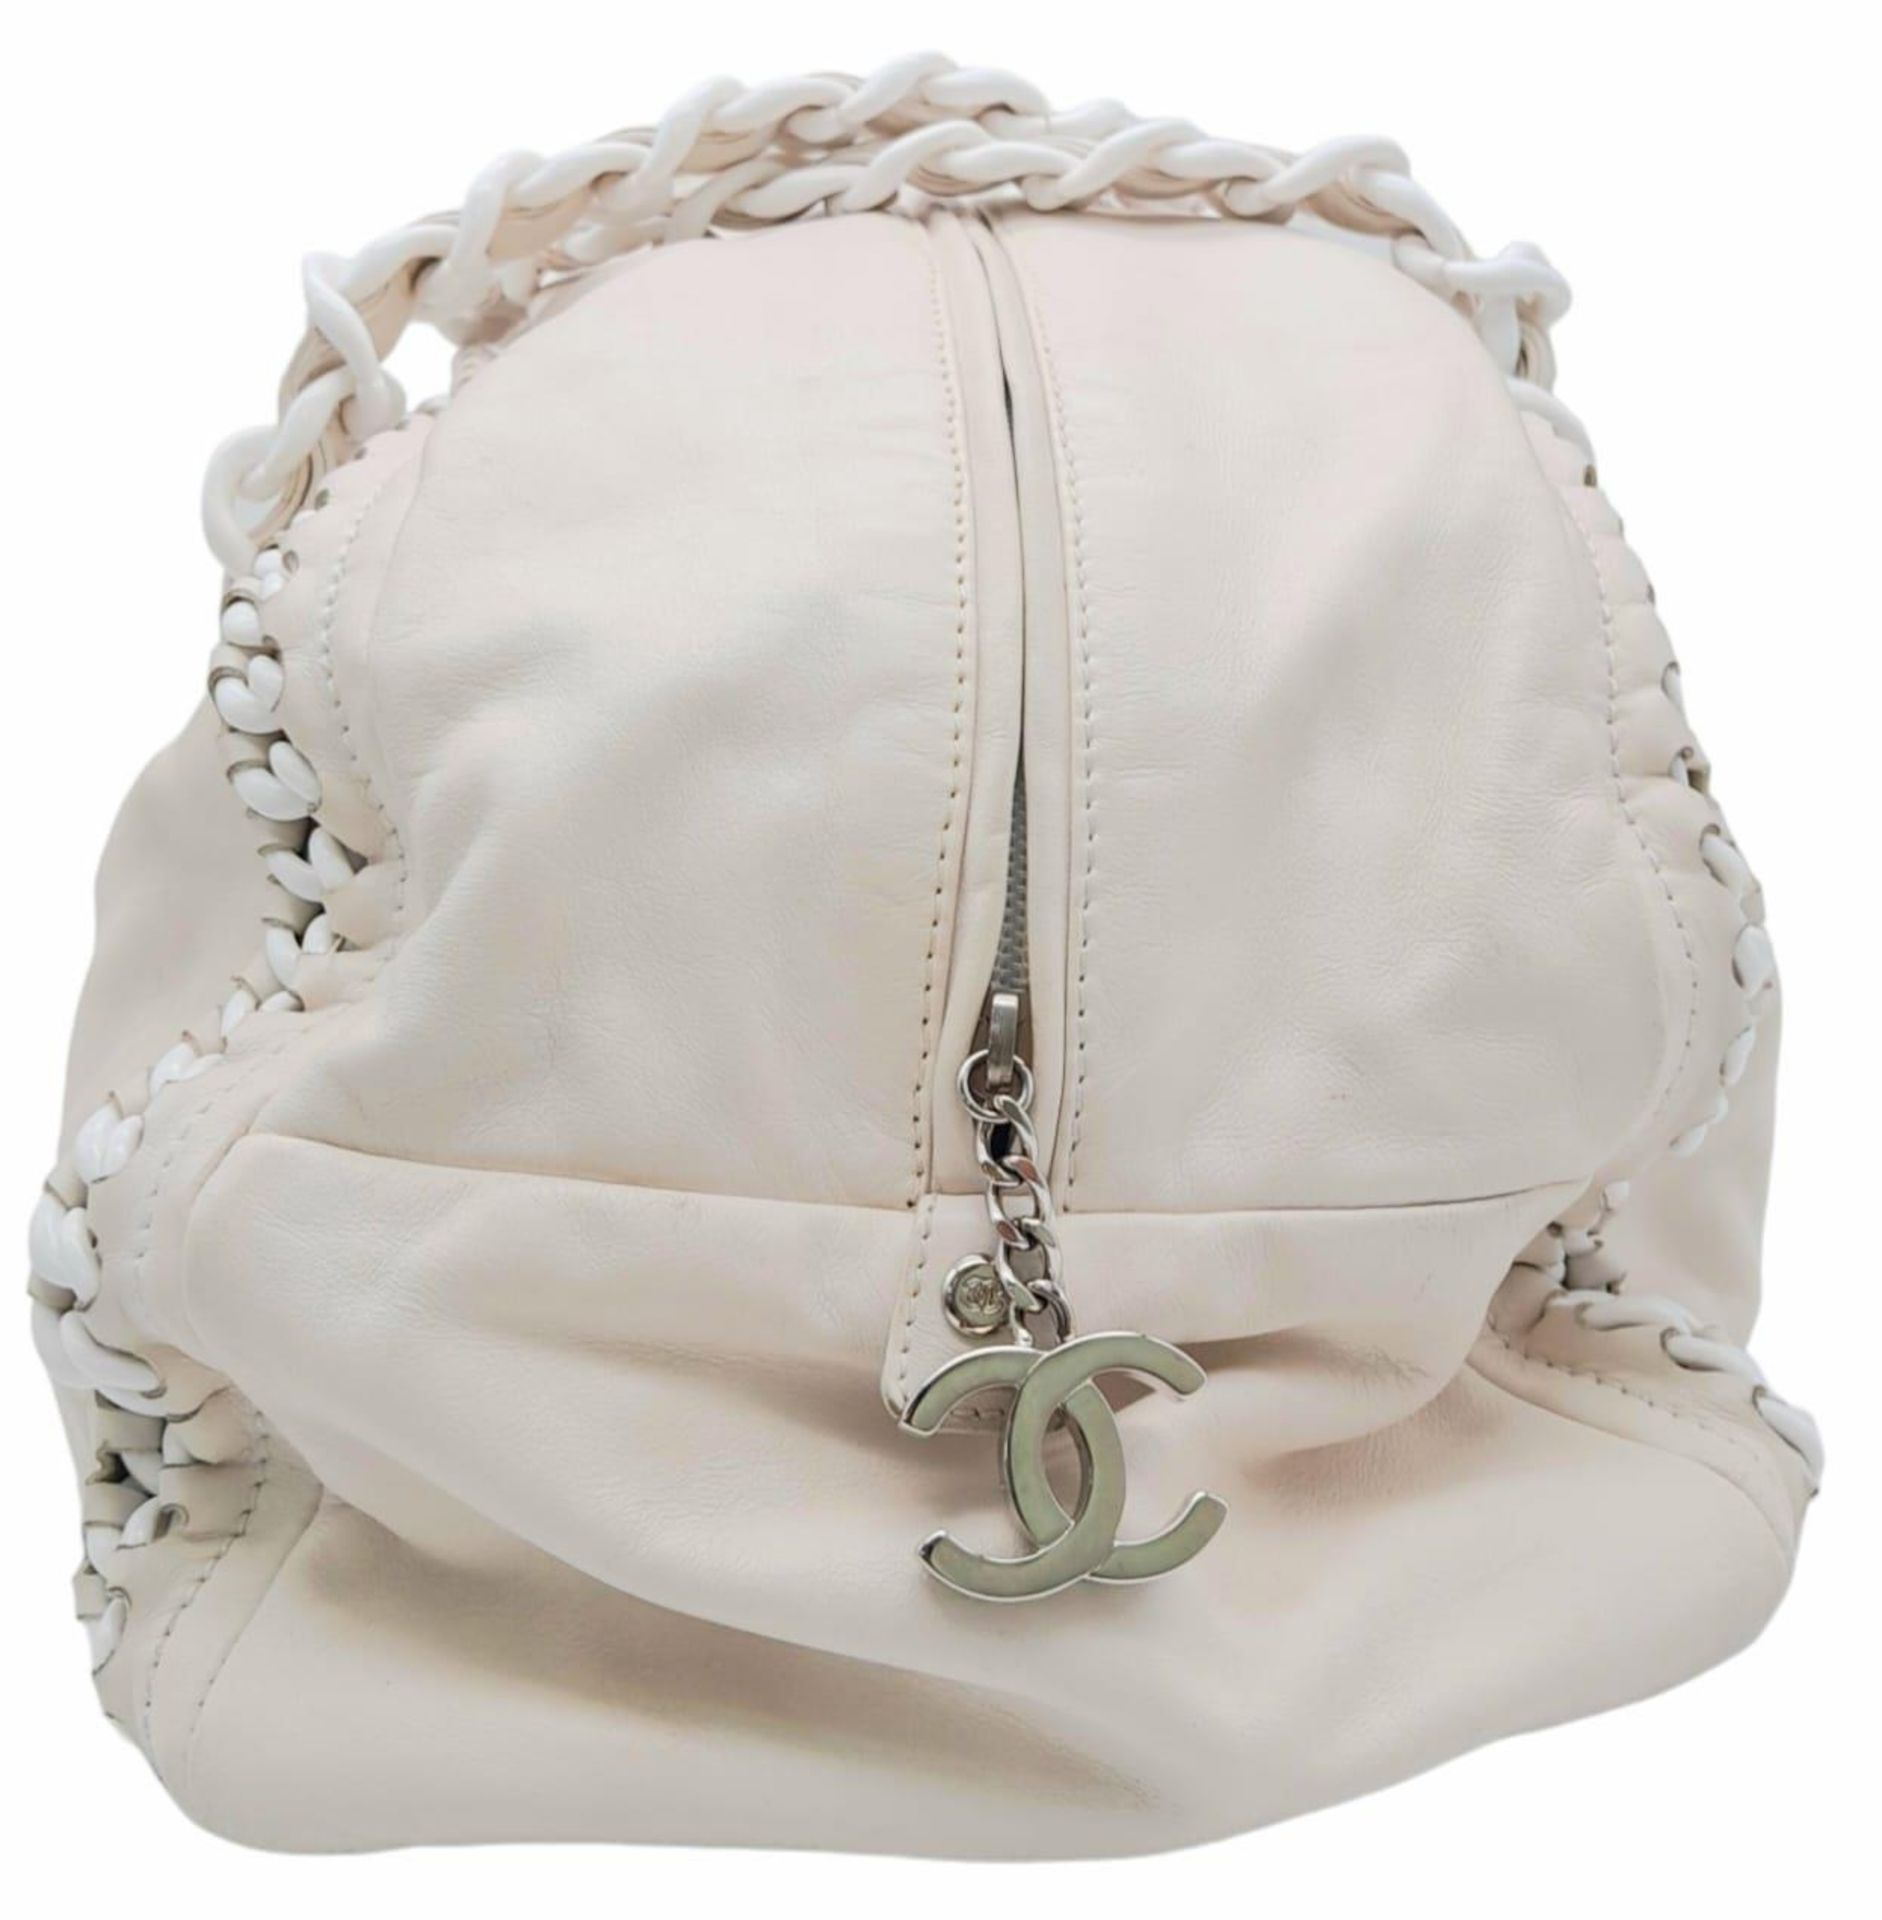 A Chanel Cream Crinkled Leather Chain Bag. Interwoven chain and leather top handles. Zip closure - Image 3 of 10